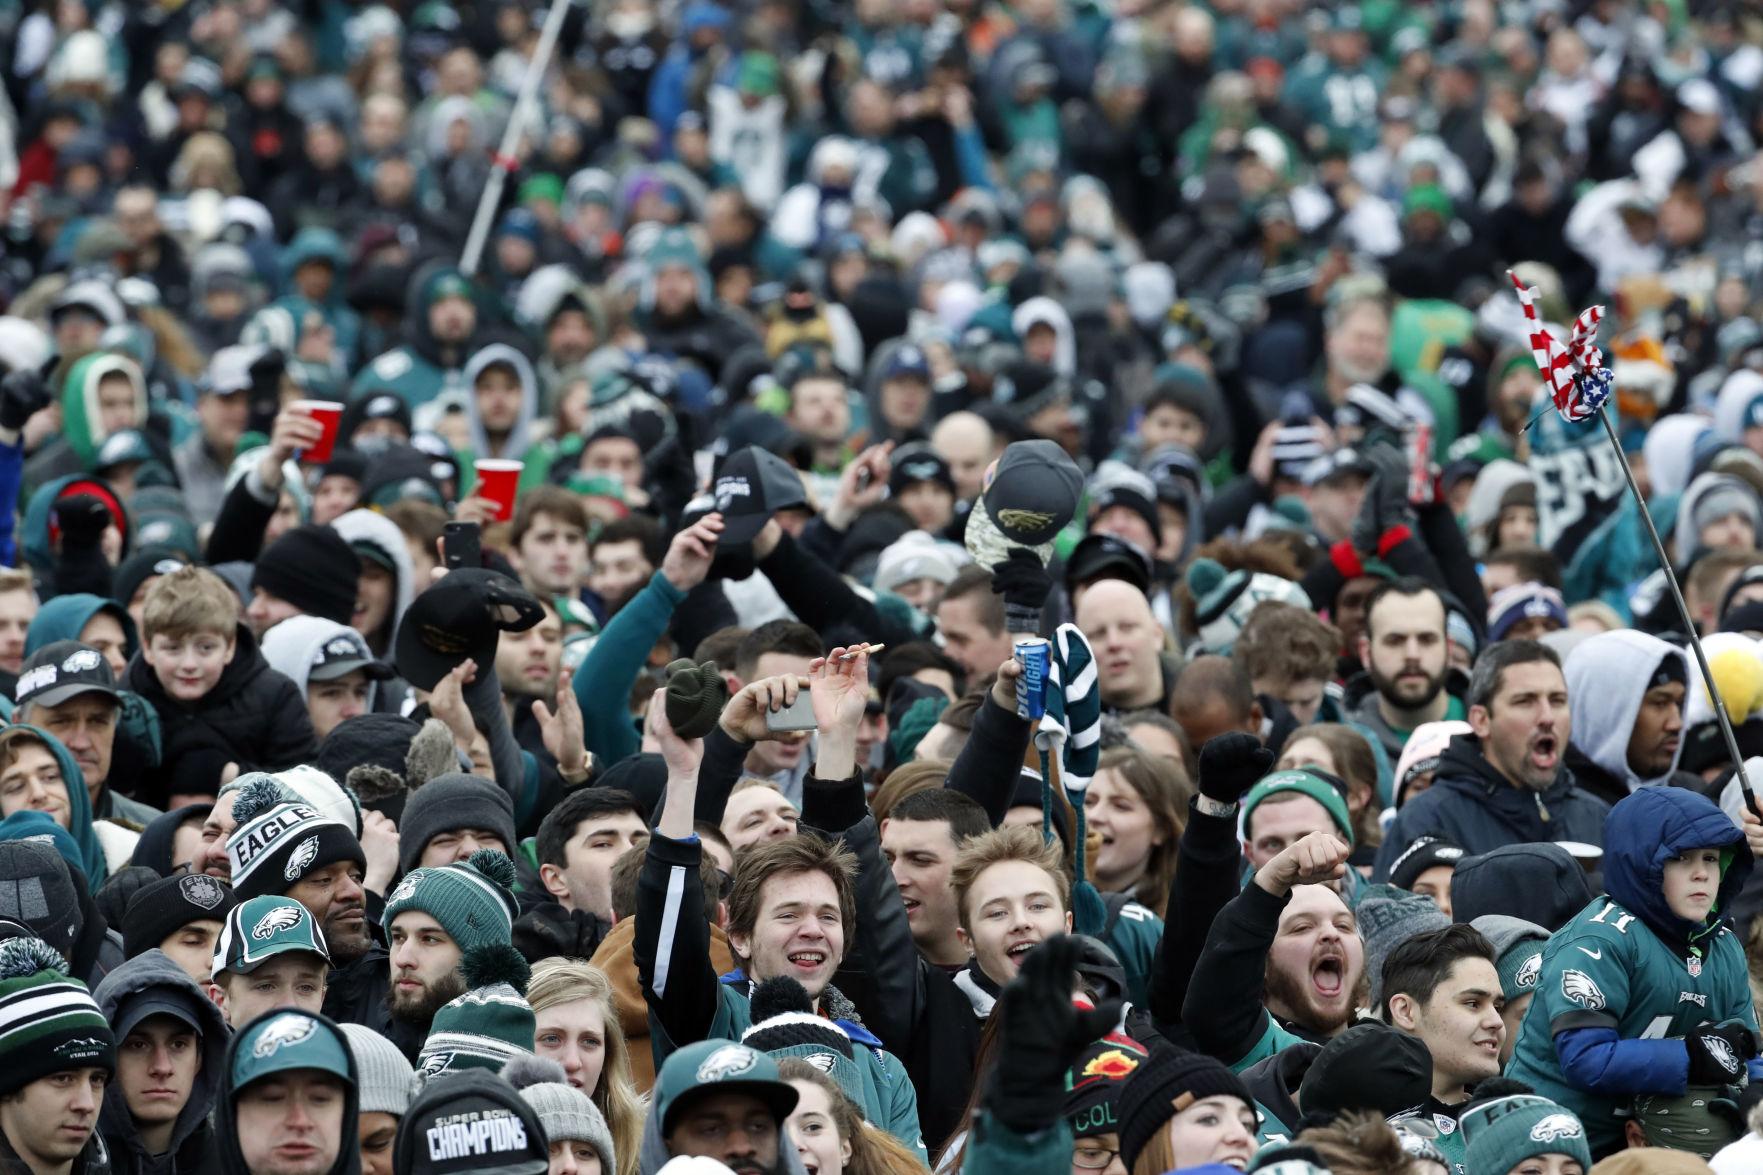 Eagles parade brings joy to hundreds of thousands of fans in